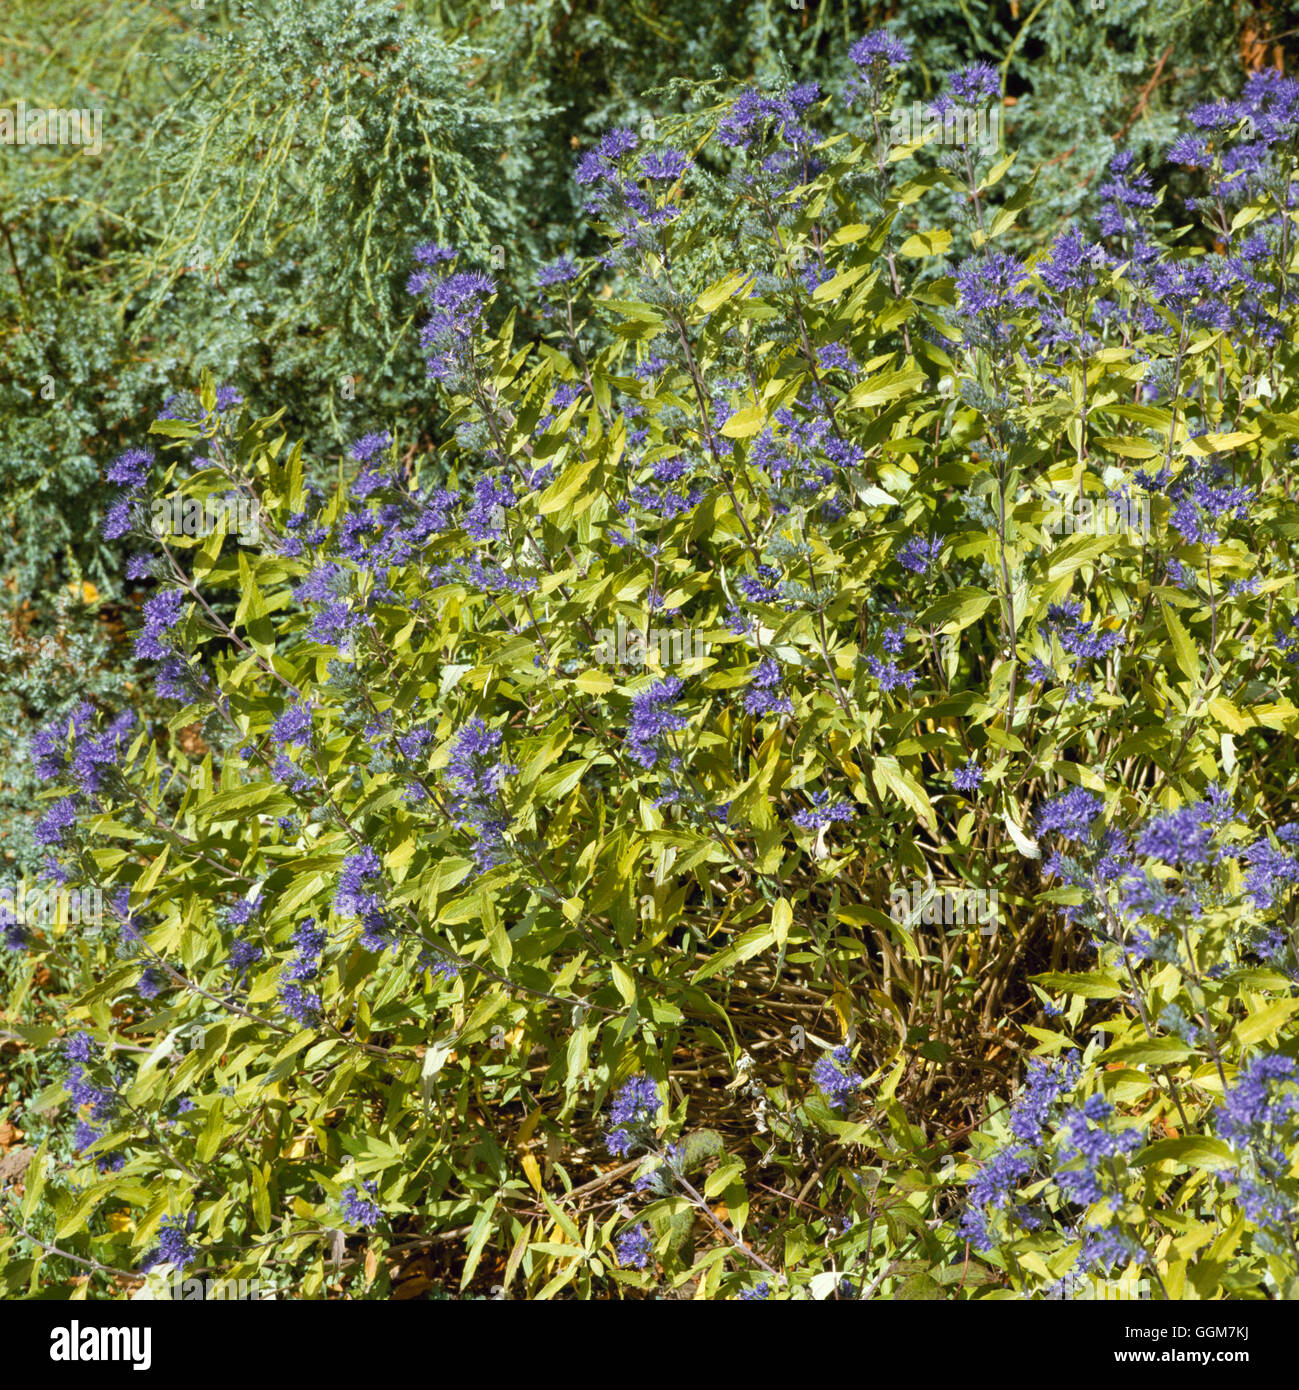 Caryopteris x clandonensis Worcester Gold' - 'TRS AGA046420 Banque D'Images